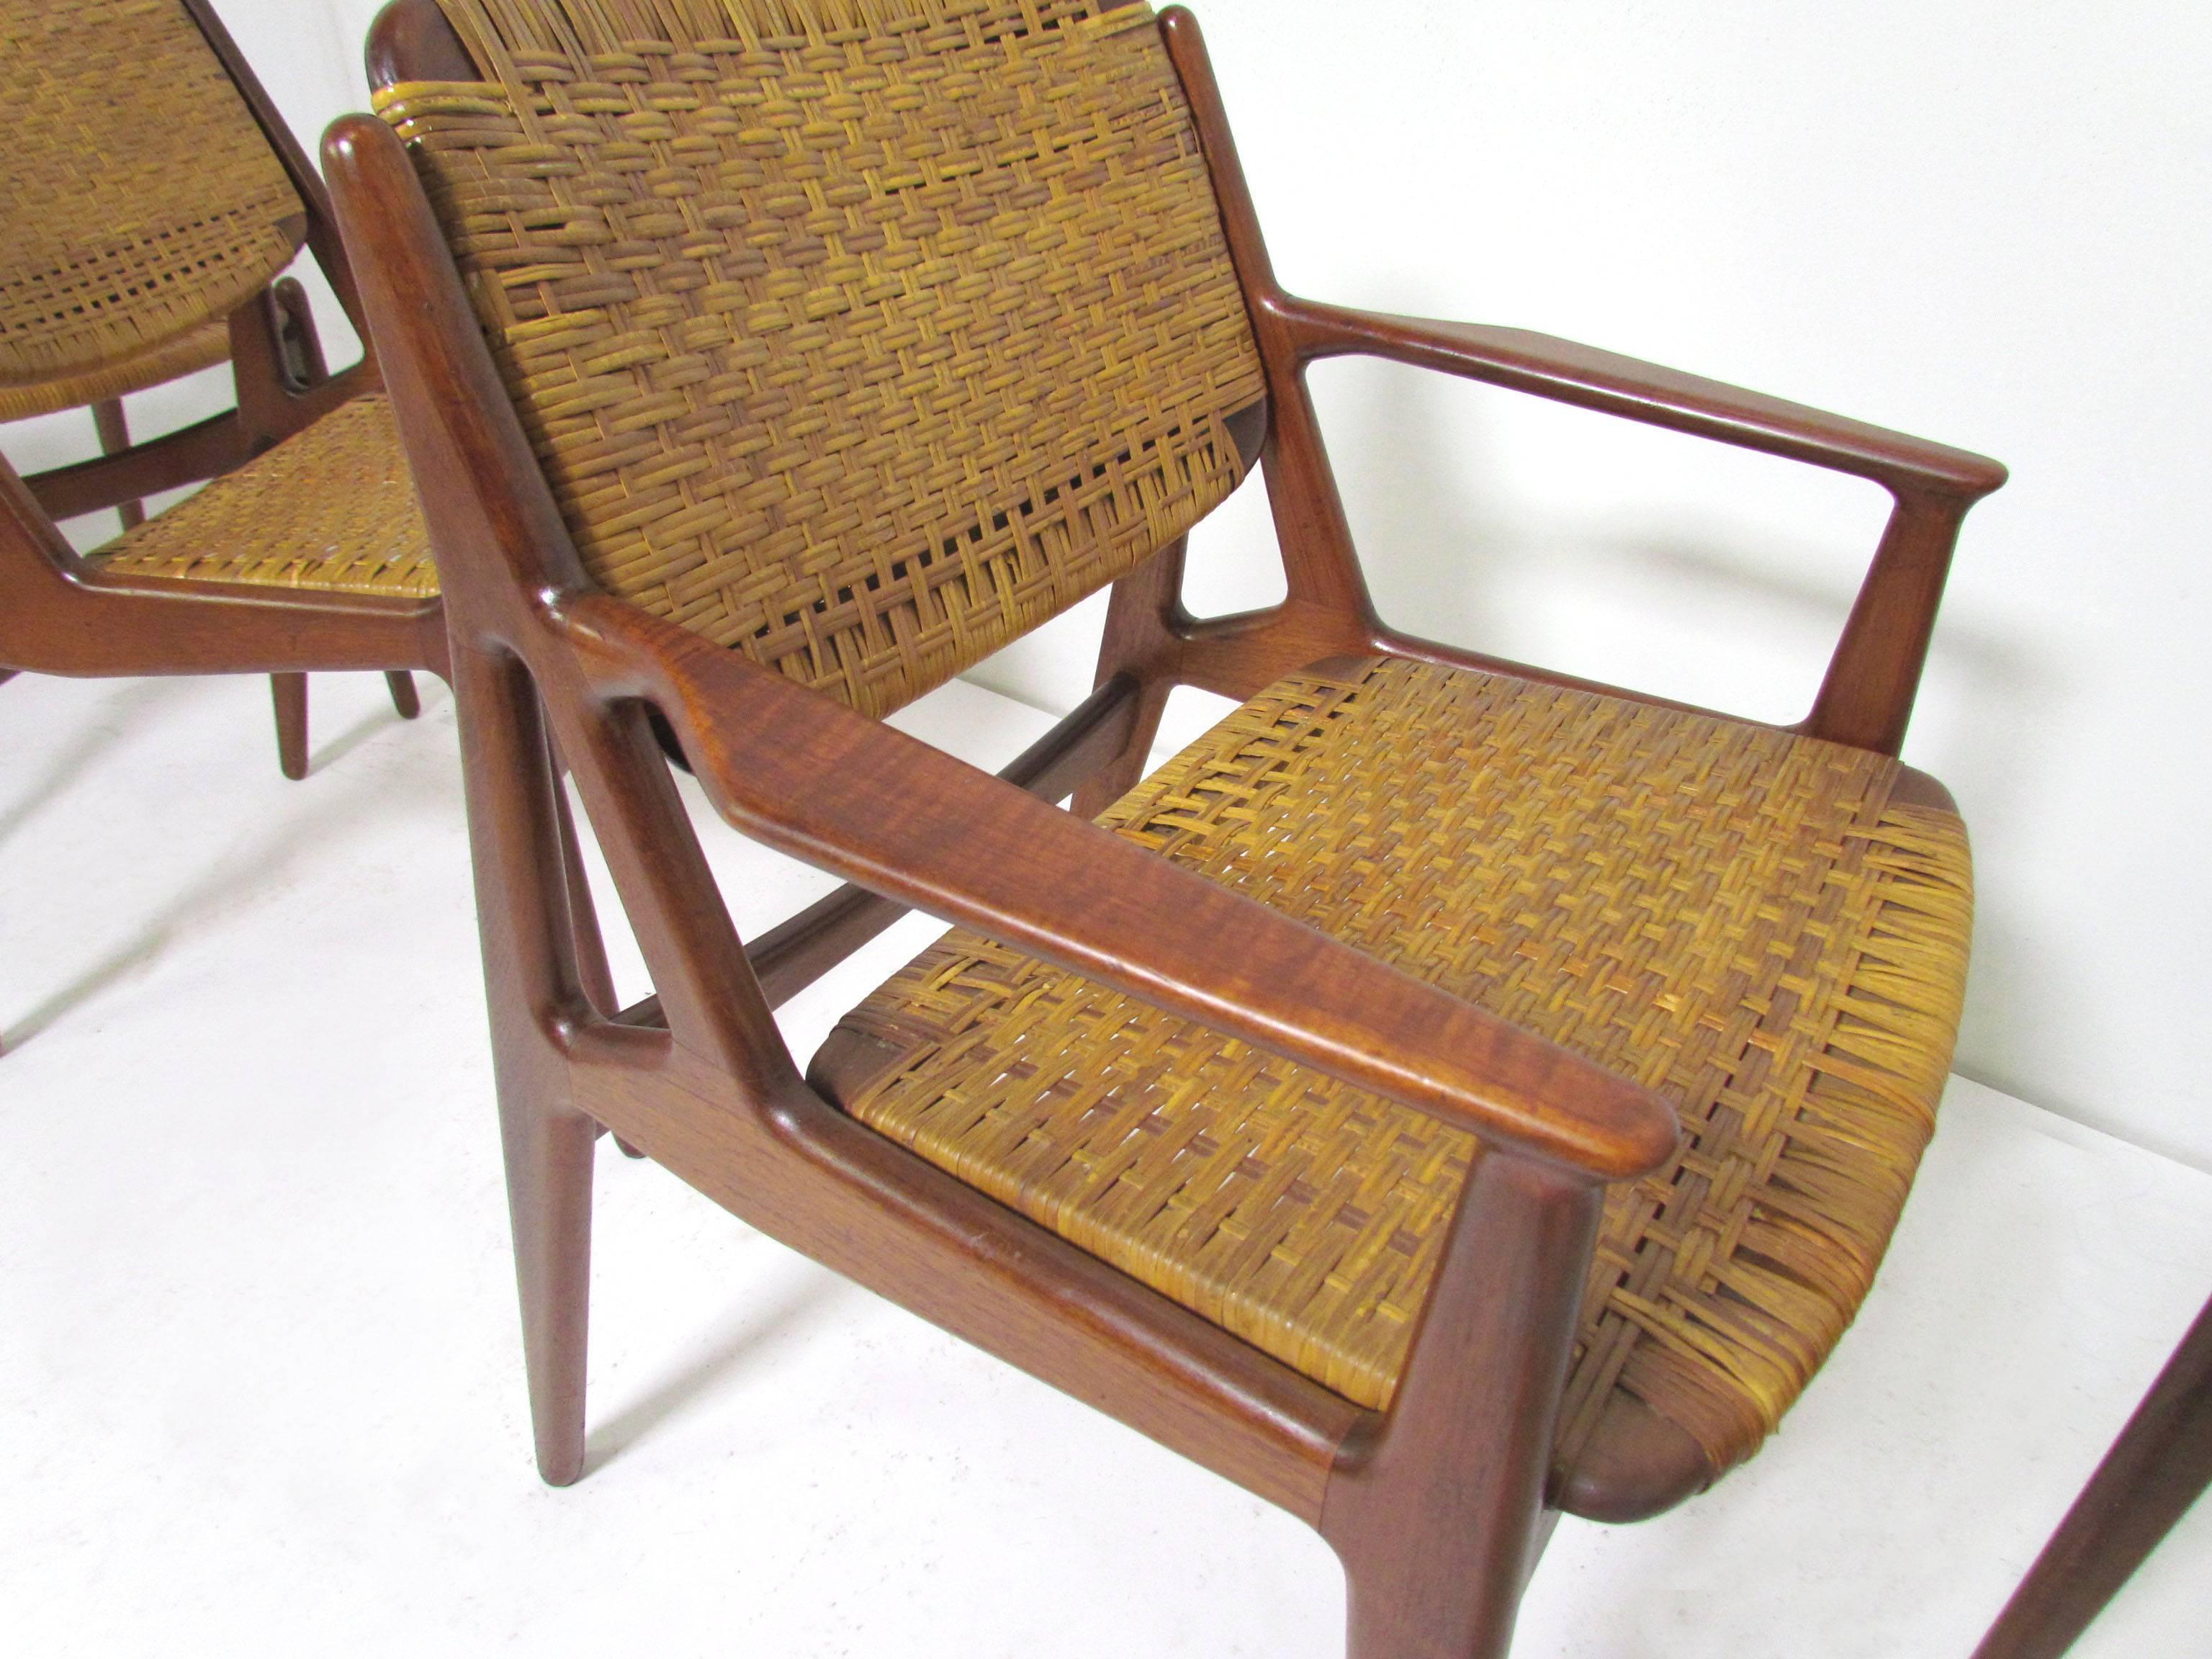 Mid-20th Century Set of Five Danish Teak and Cane Dining Chairs by Arne Vodder for Vamo